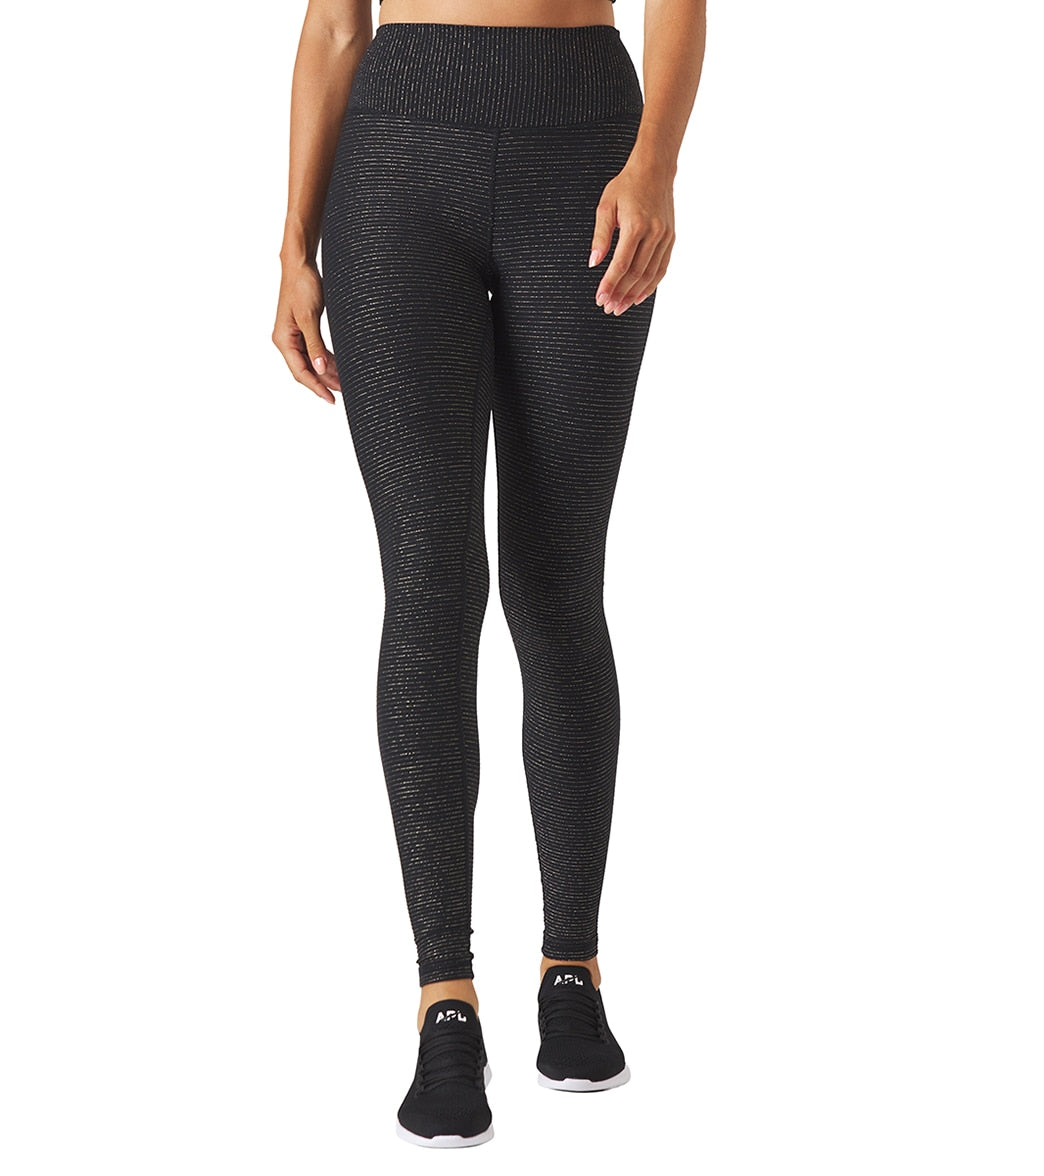 Glyder Sultry Yoga Leggings at YogaOutlet.com - Free Shipping